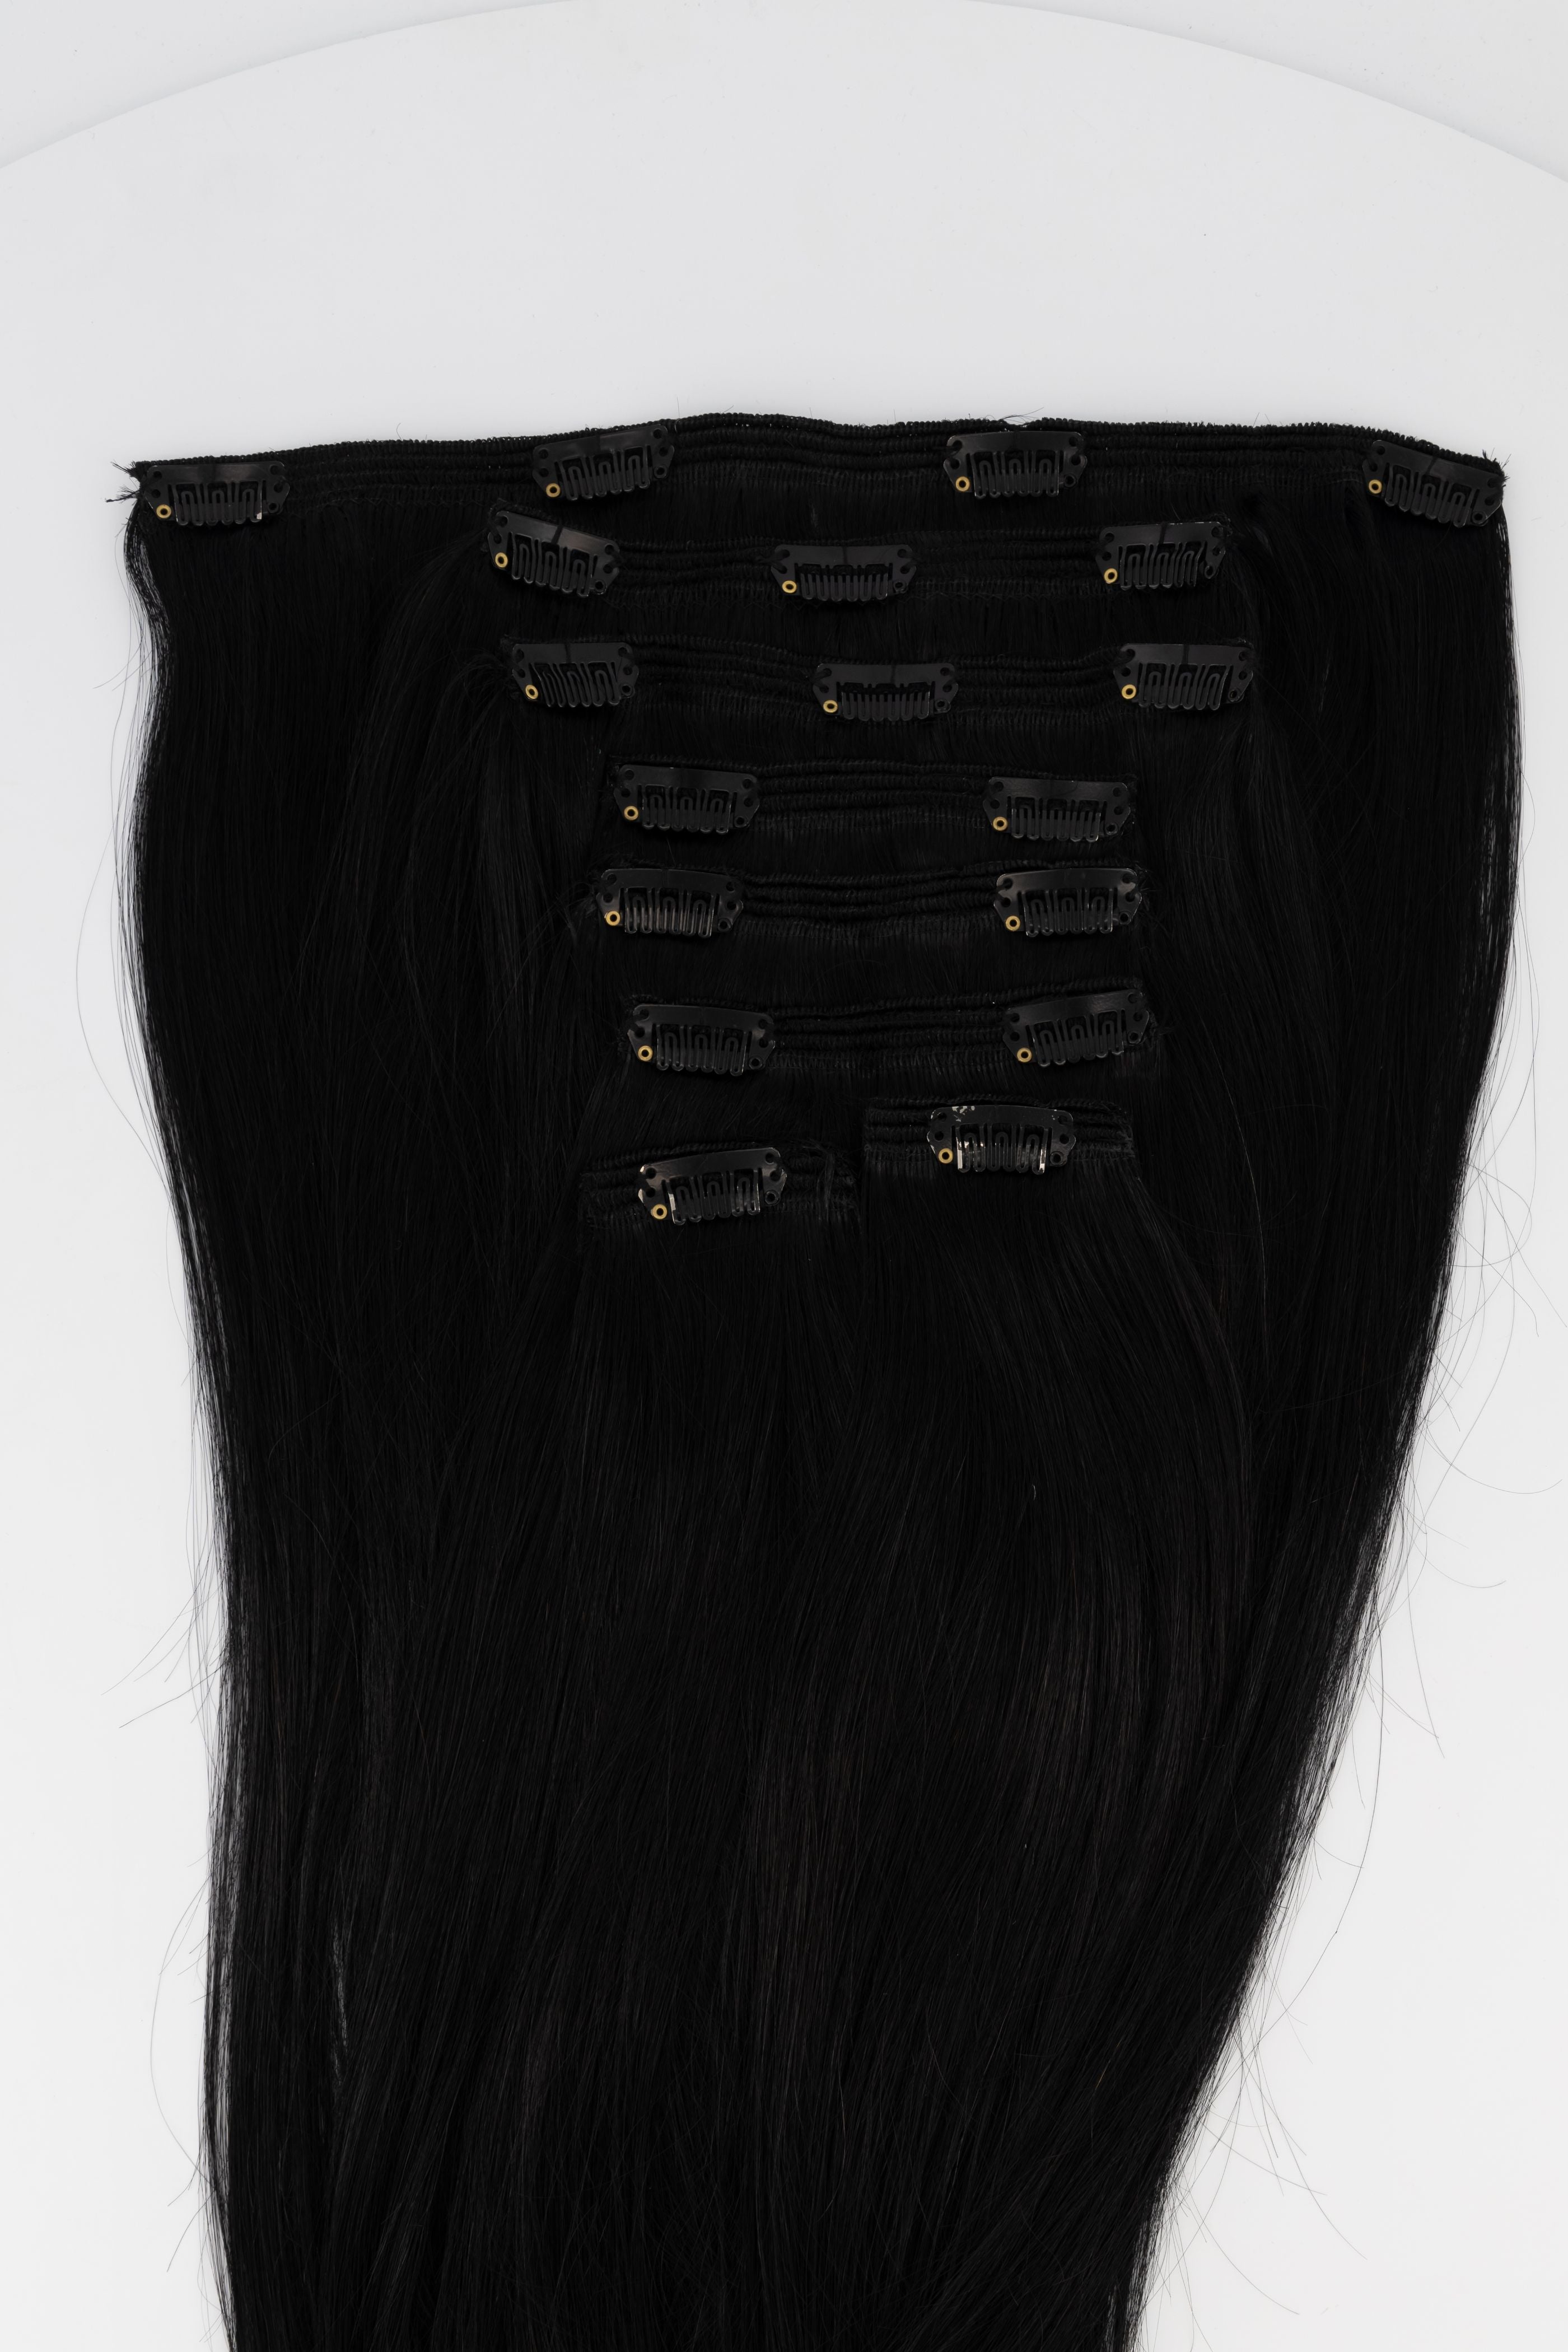 Frontrow clip-in hair extensions in jet black